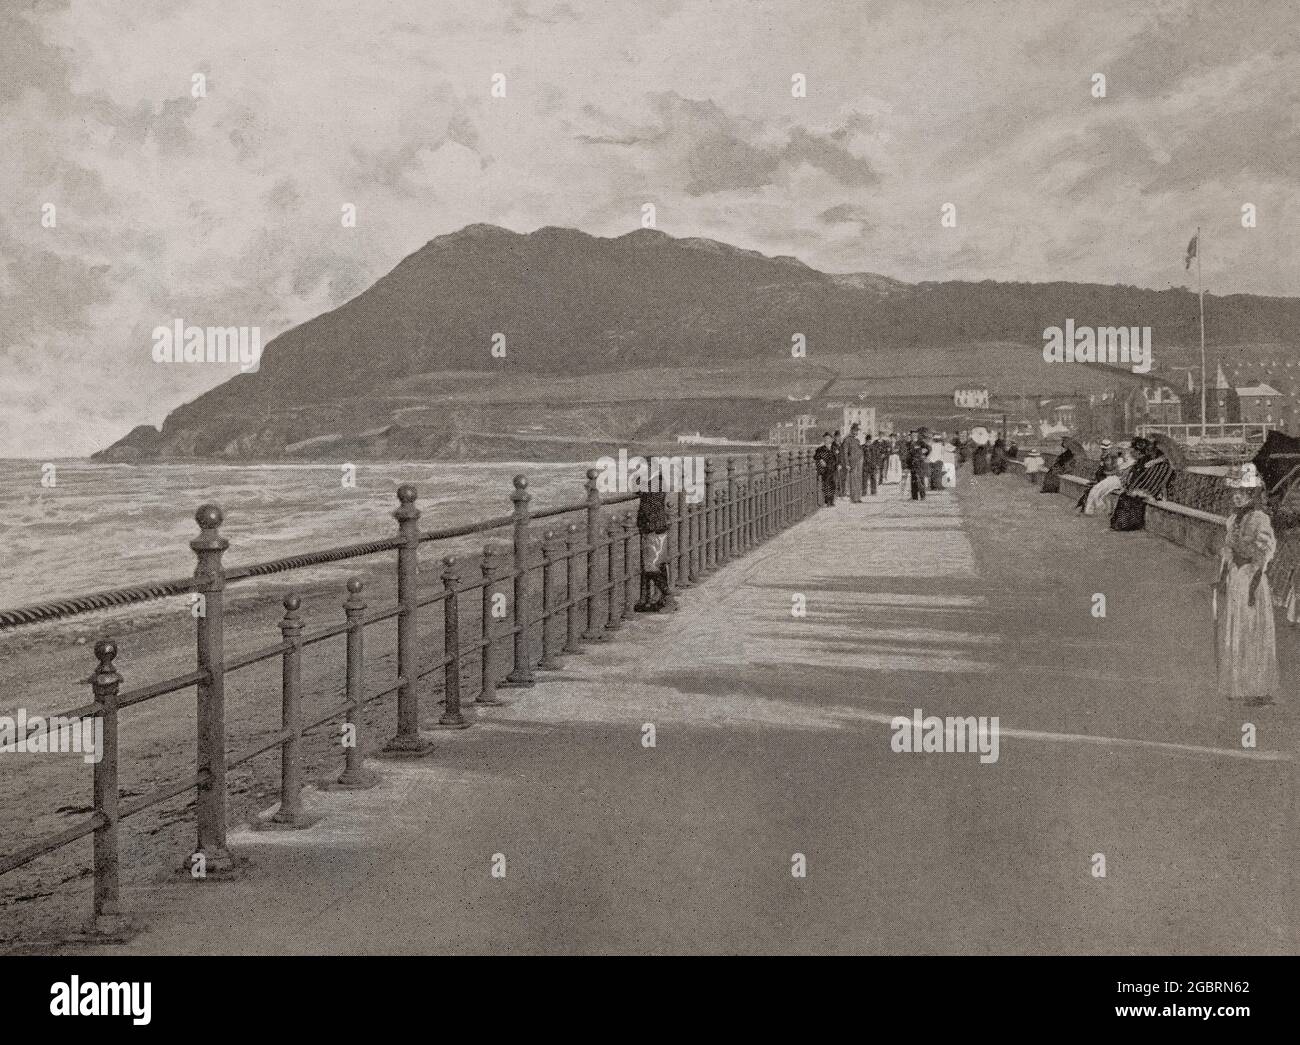 A late 19th century view of the promenade in Bray in north County Wicklow, Ireland. In medieval times, it was a small manorial village on the southern border of the Pale, then during the latter part of the 18th century, the Dublin middle-classes began to relocate there.  The Dublin and Kingstown Railway was extended as far as Bray in 1854 and the town grew to become a seaside resort, with hotels and residential terraces built in the vicinity of the seafront. Stock Photo